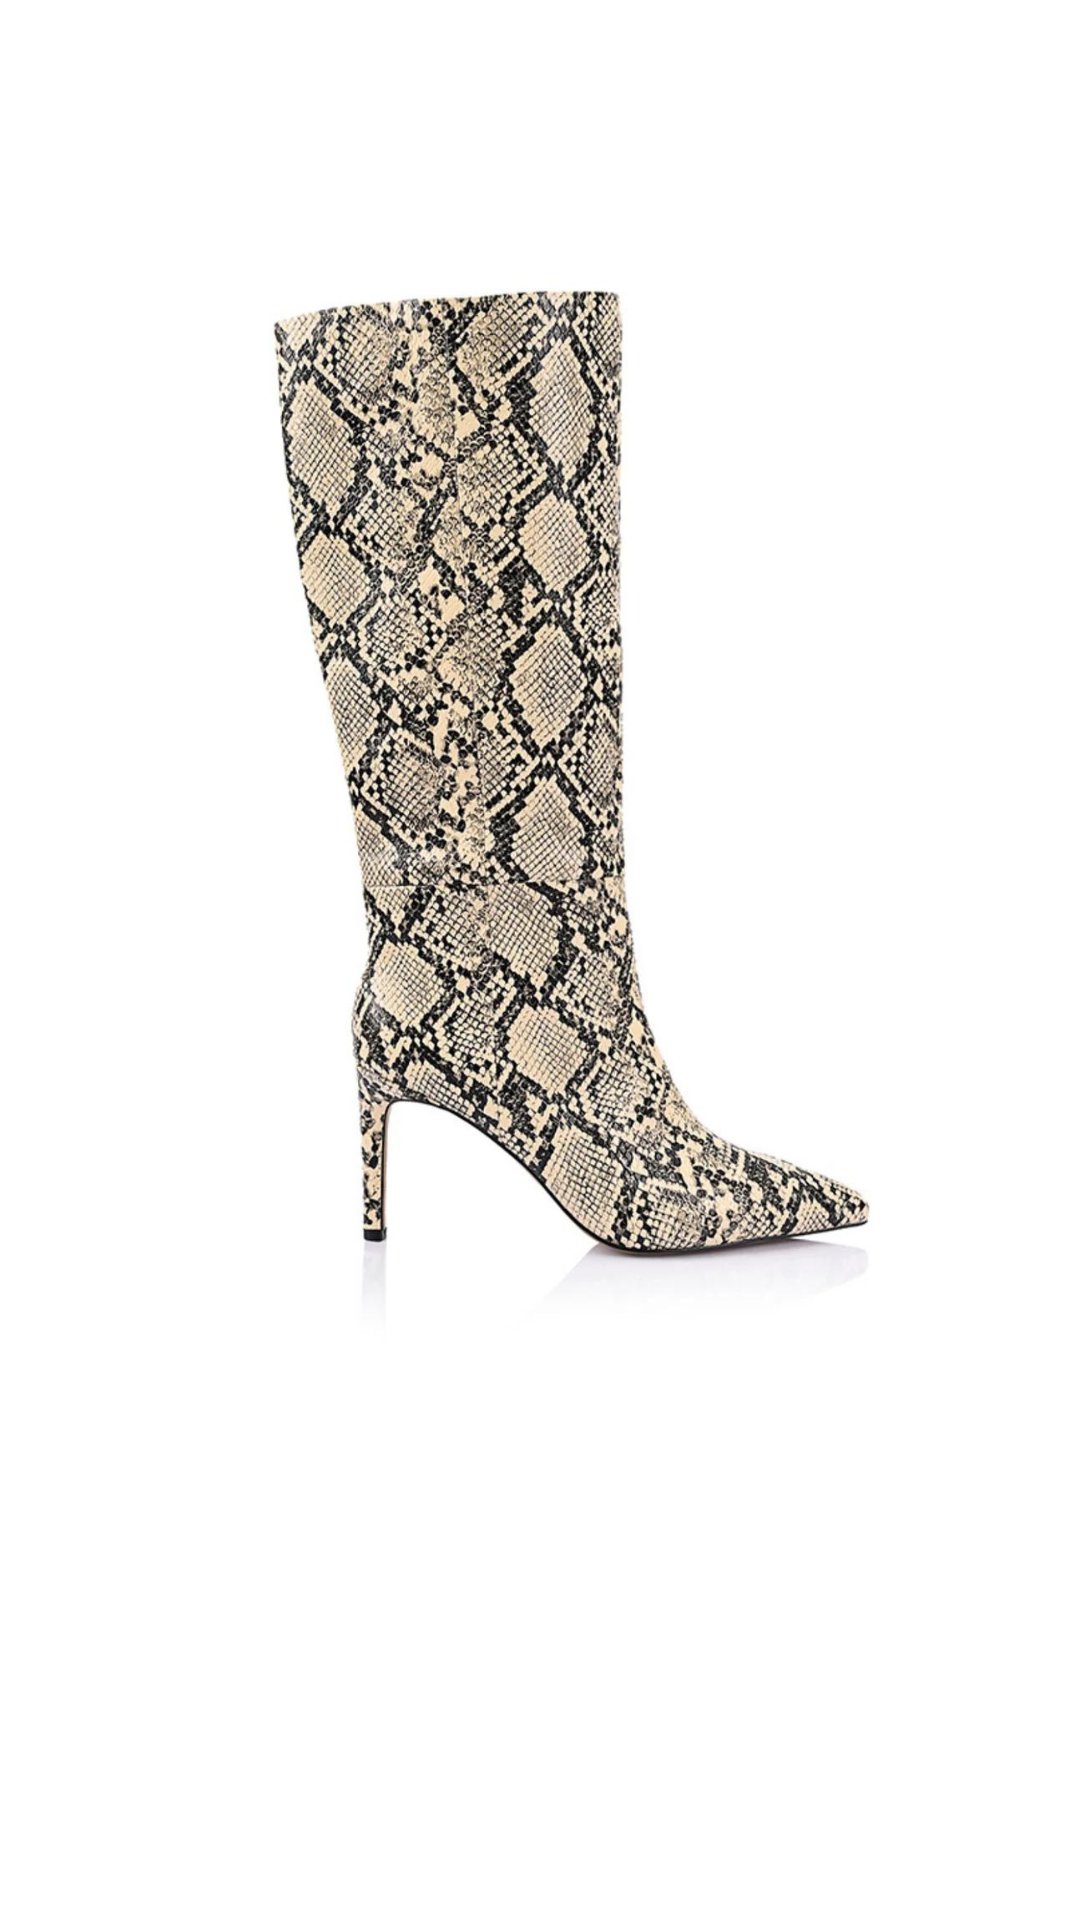 Lana Wilkinson - Huw Snake Print Leather Boots